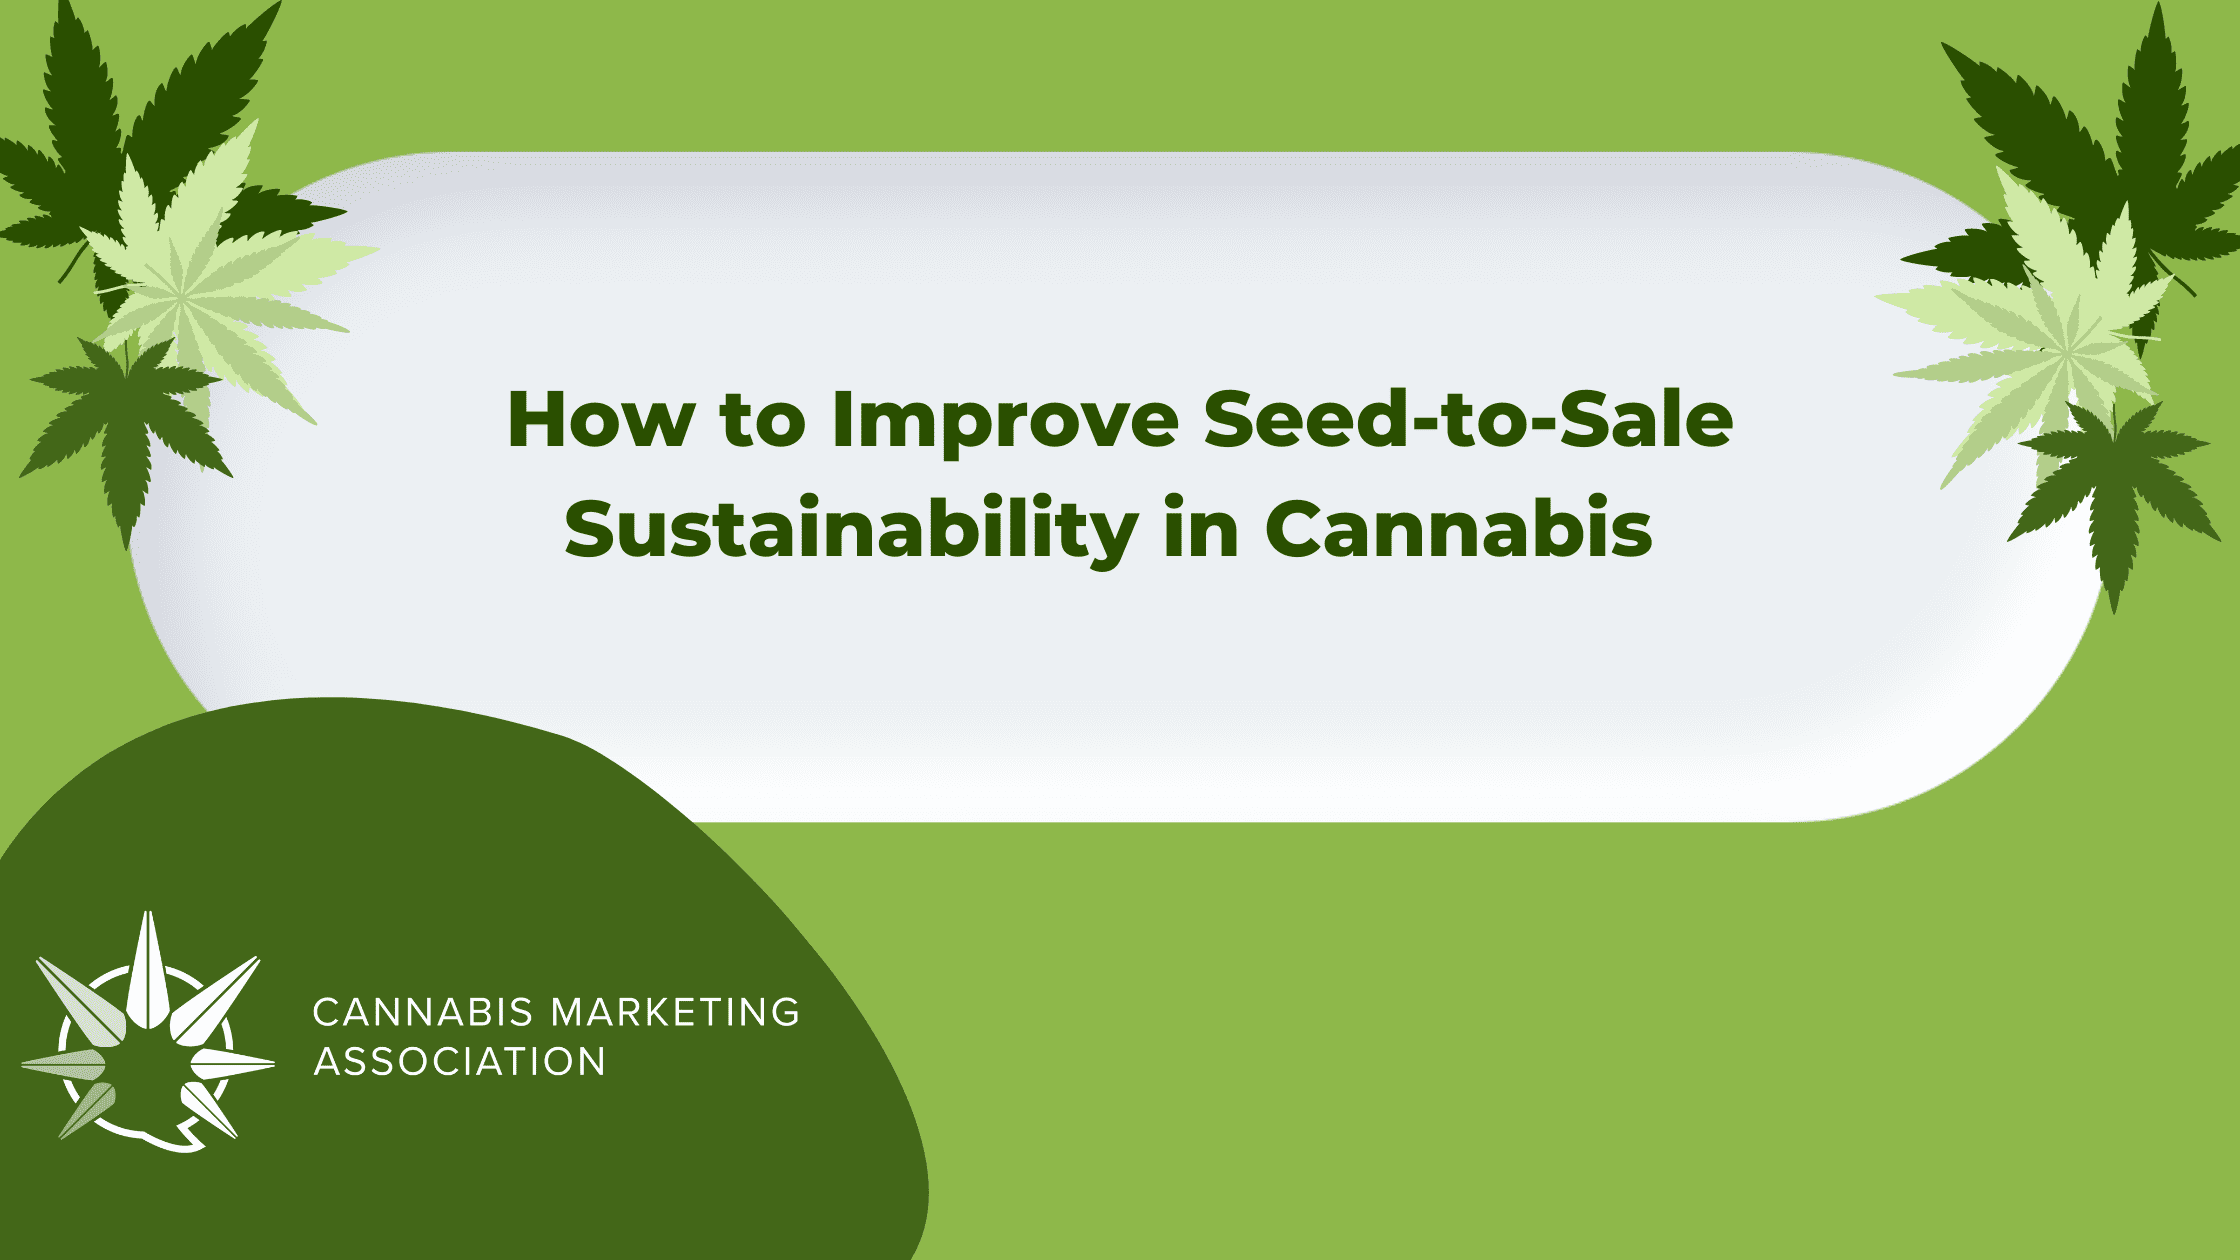 How to Improve Seed-to-Sale Sustainability in Cannabis